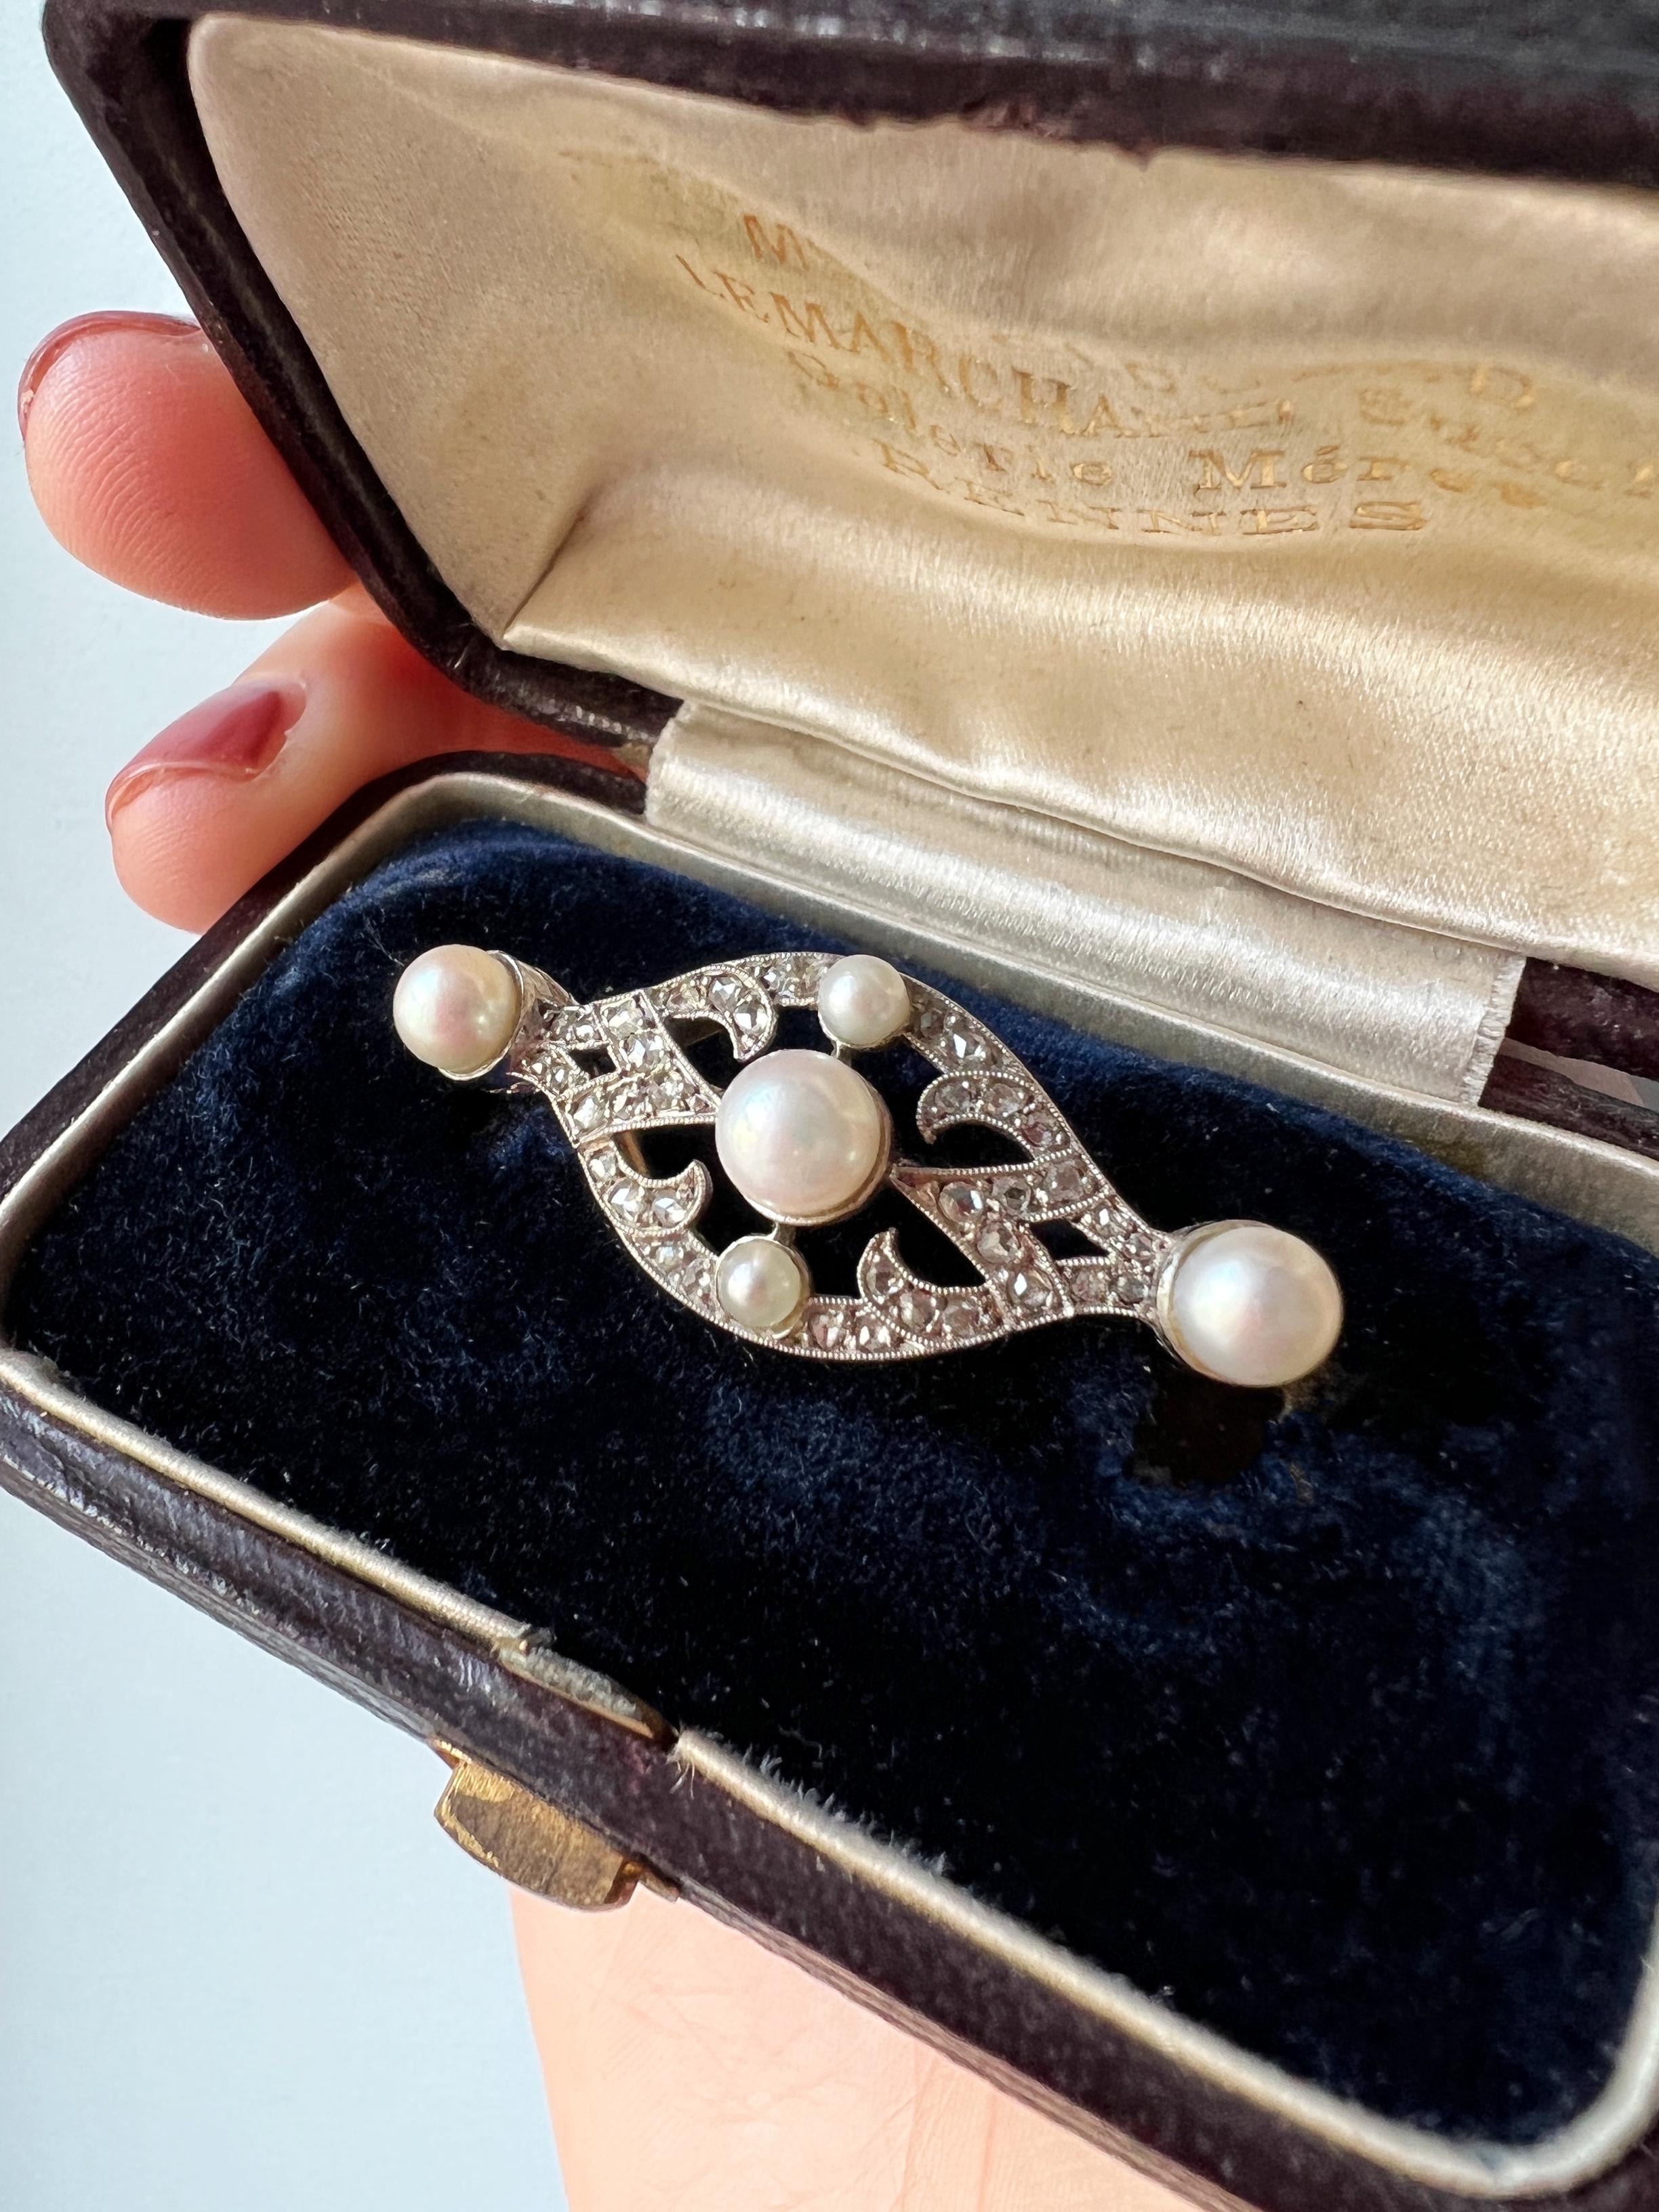 Diamonds and pearls offer a timeless classic combination for Christmas. The two gems complement each other perfectly, with pearls softening the dazzling factor of the diamonds. For sale a refined and very elegant French Art Deco era brooch,